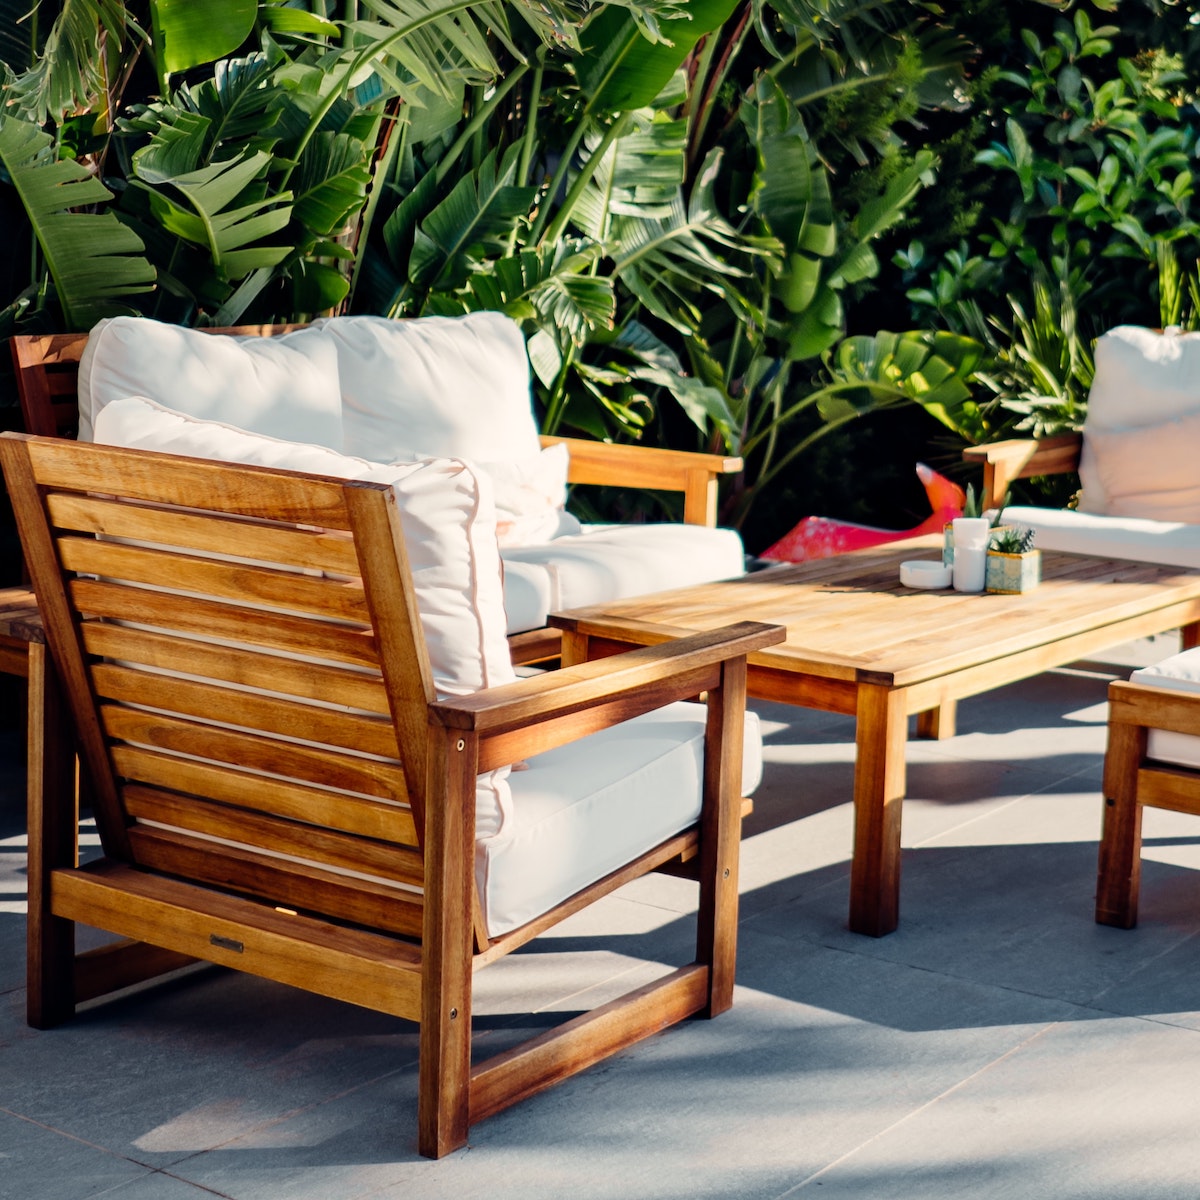 Take good care of your wooden garden furniture